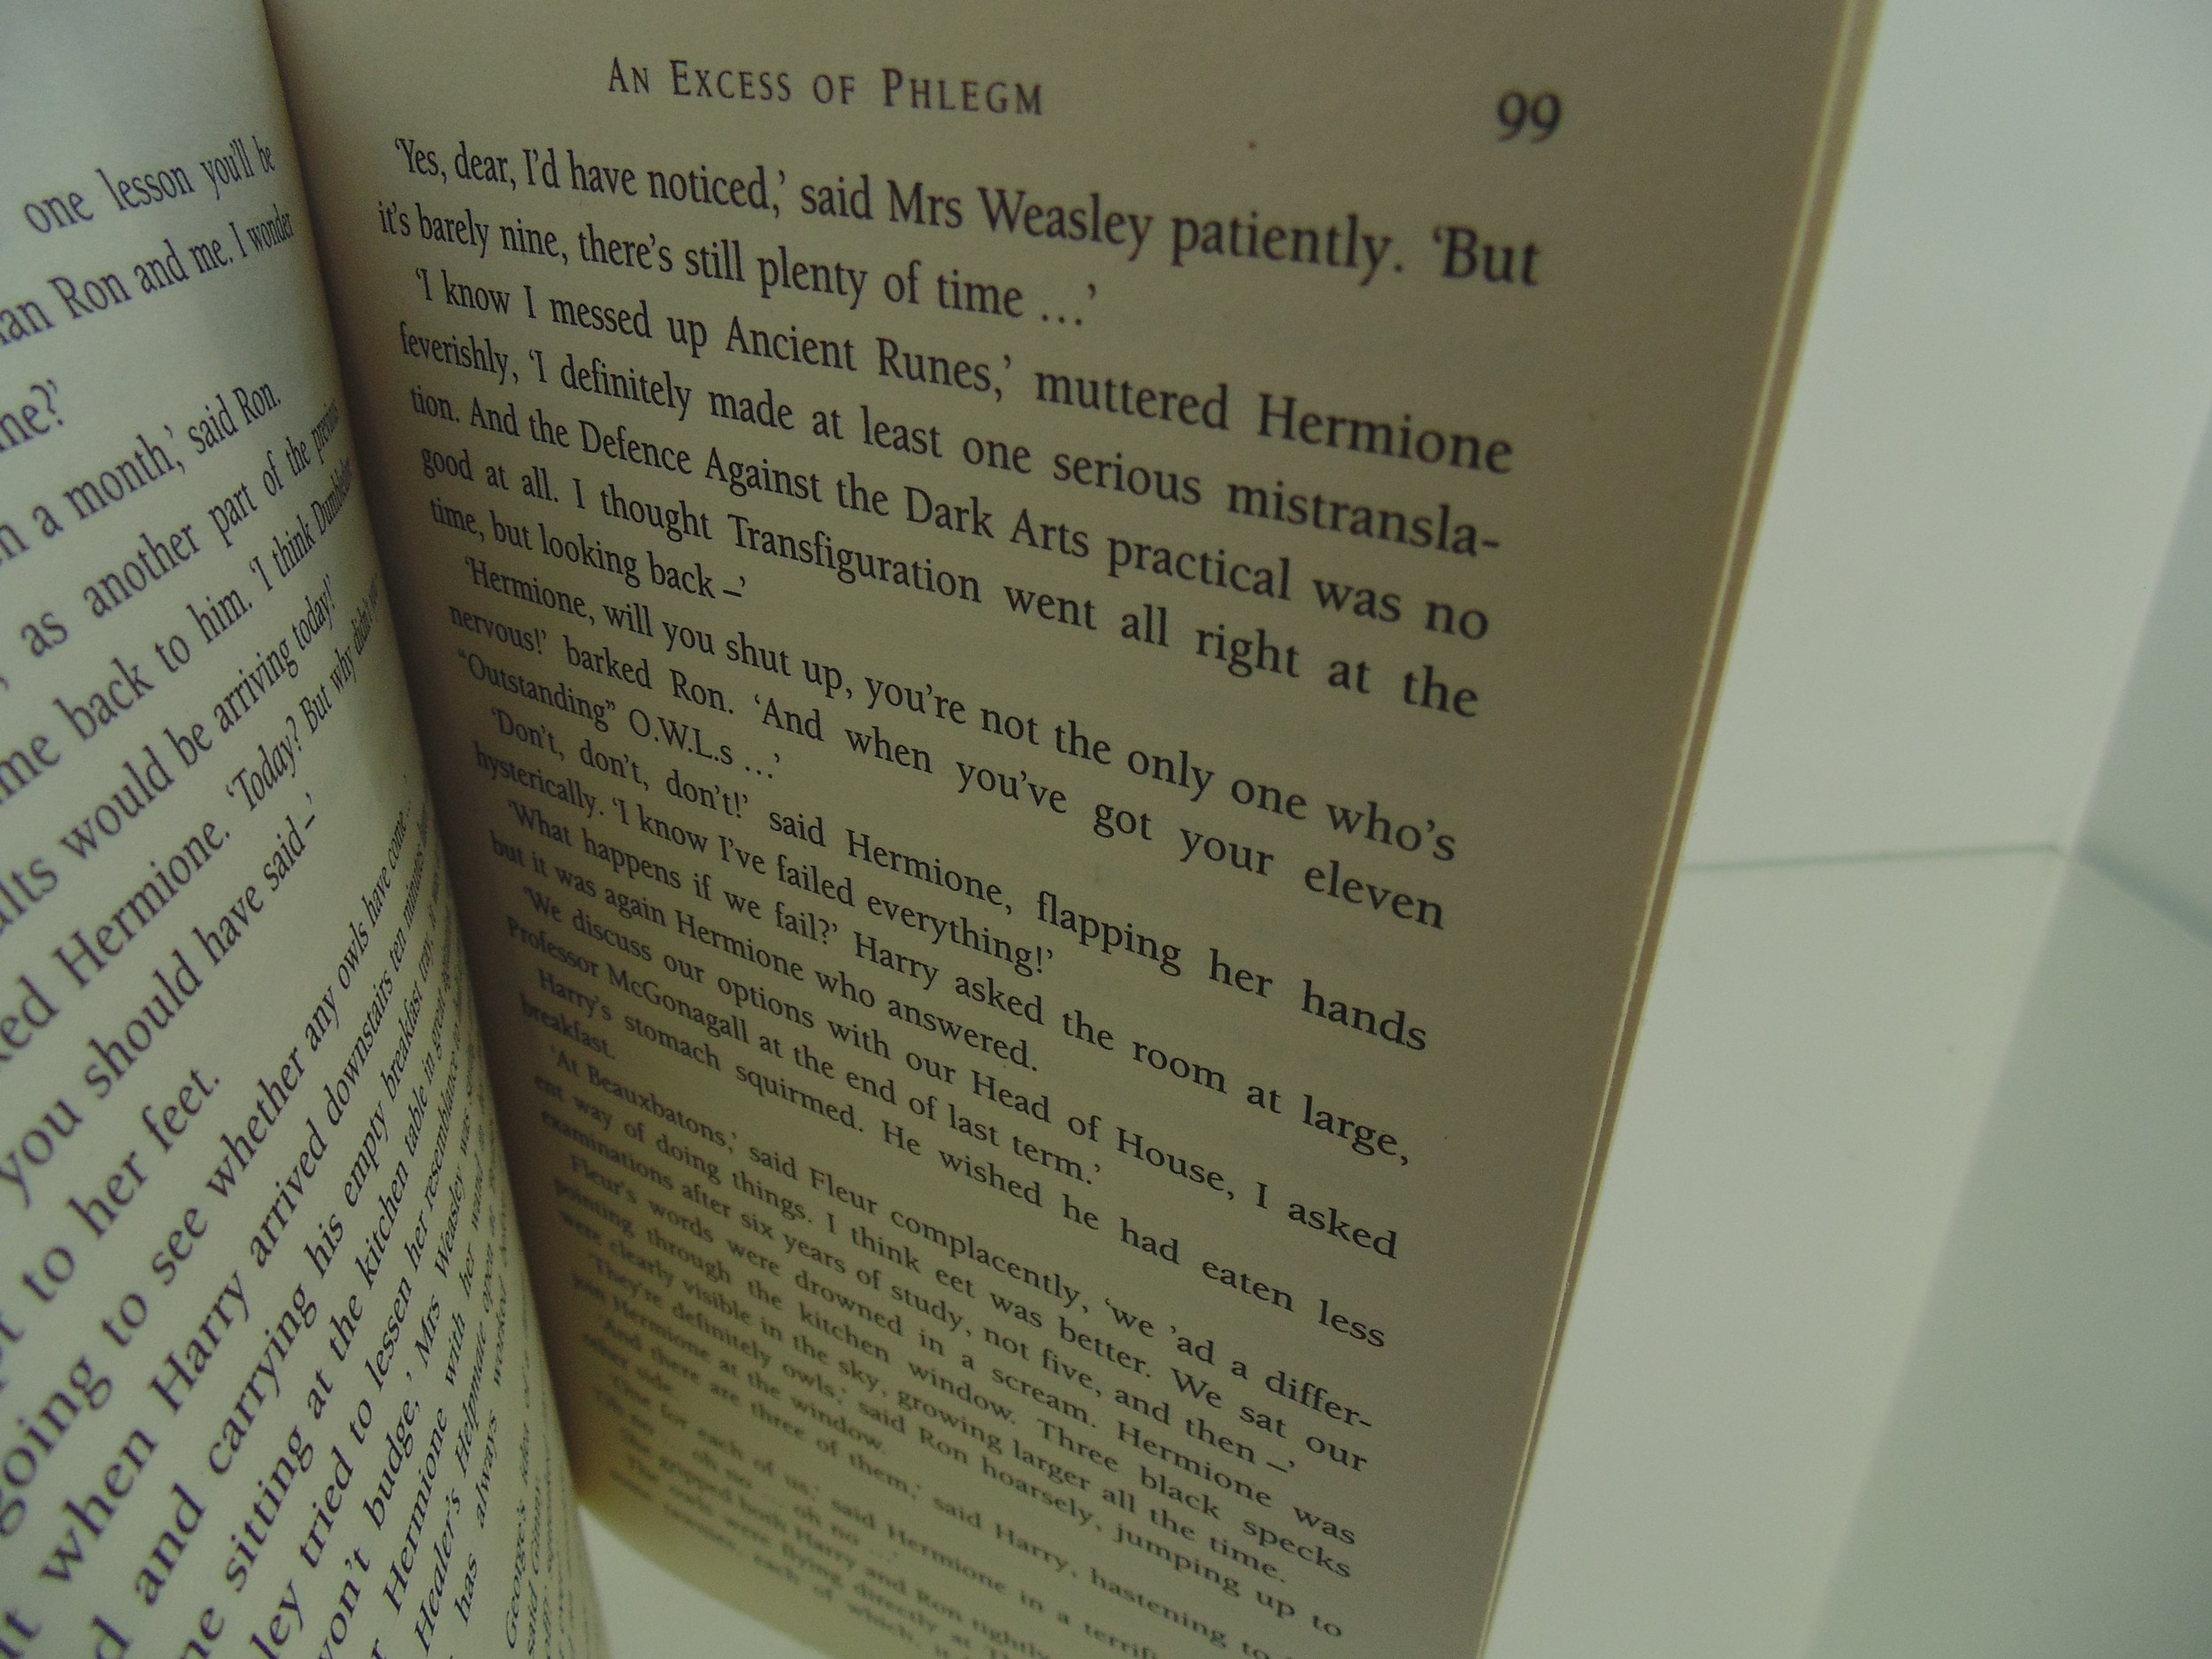 Harry Potter and the half blood prince Spelling mistake on page 99 - Image 3 of 3